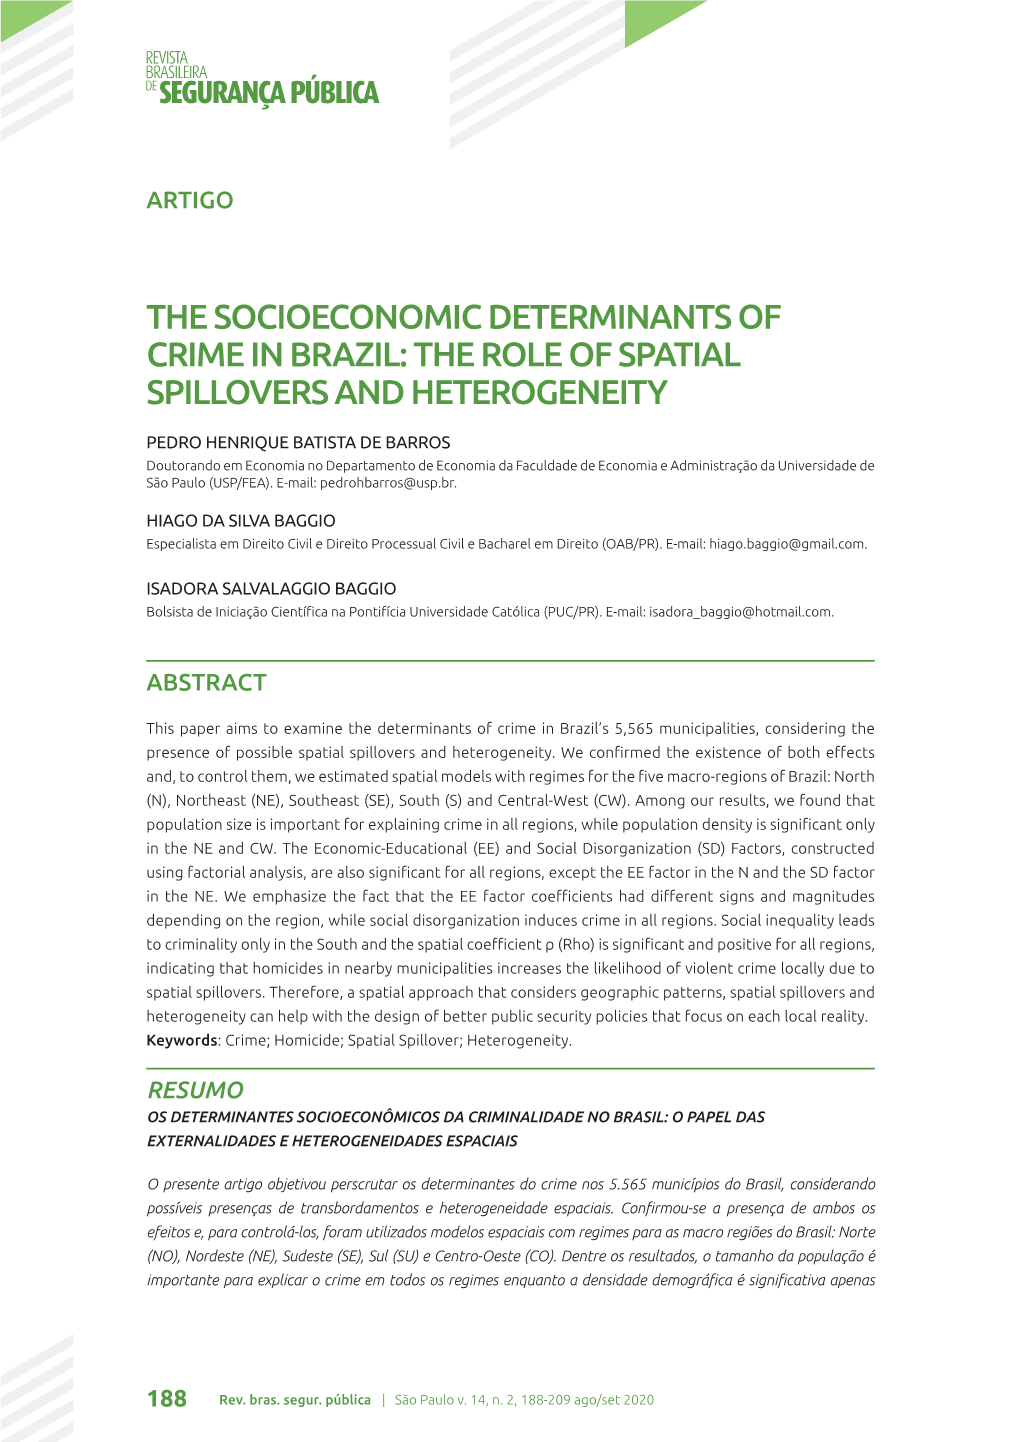 The Socioeconomic Determinants of Crime in Brazil: the Role of Spatial Spillovers and Heterogeneity